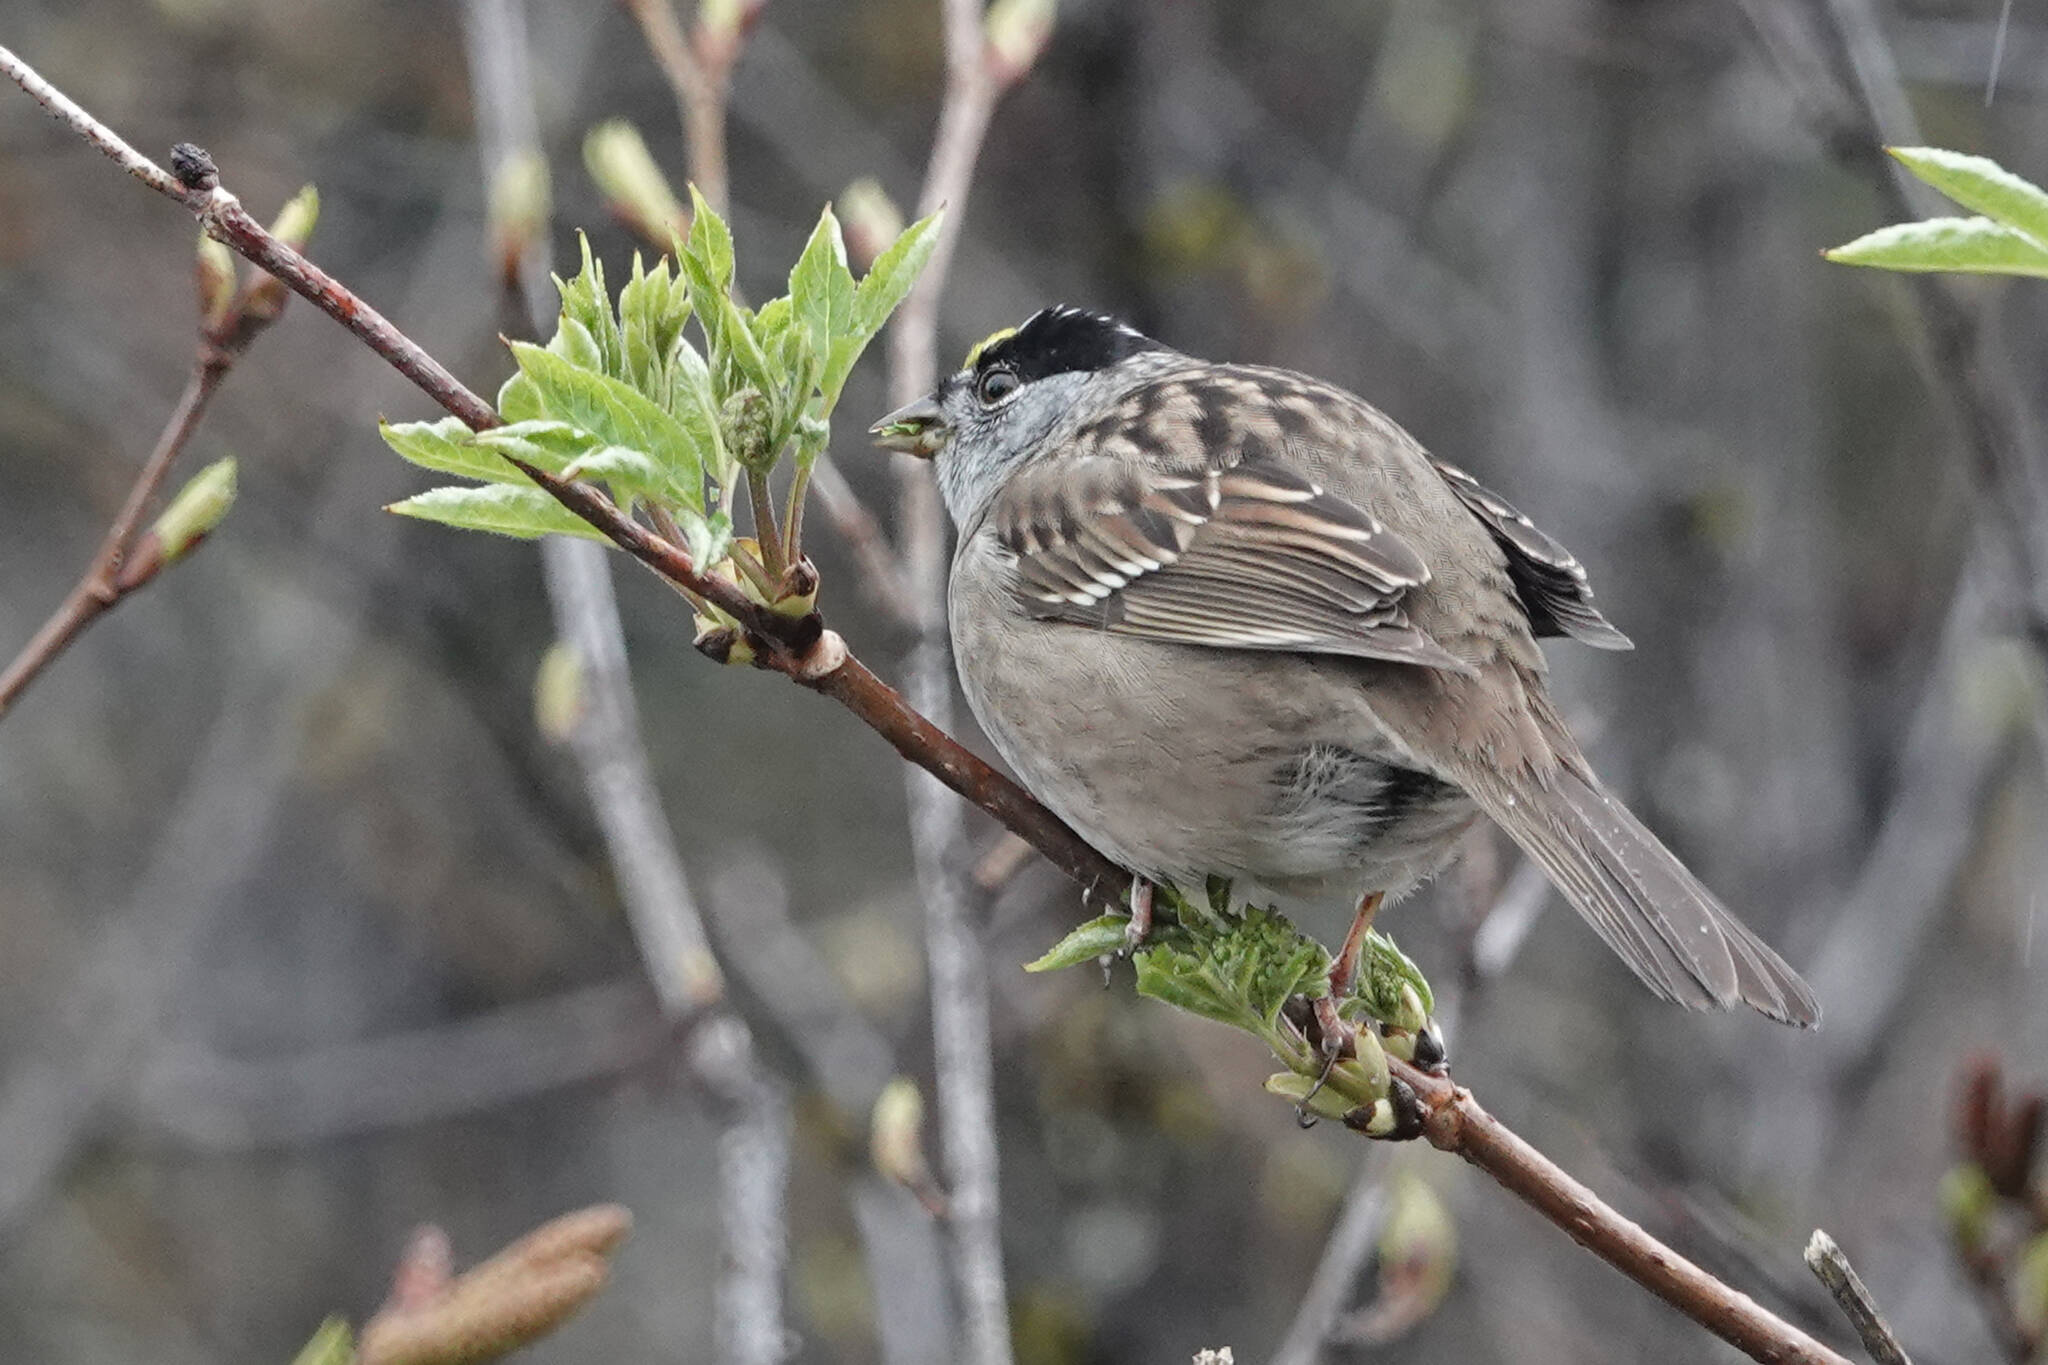 A golden-crowned sparrow nibbled on elderberry flower buds. (Courtesy Photo / Bob Armstrong)